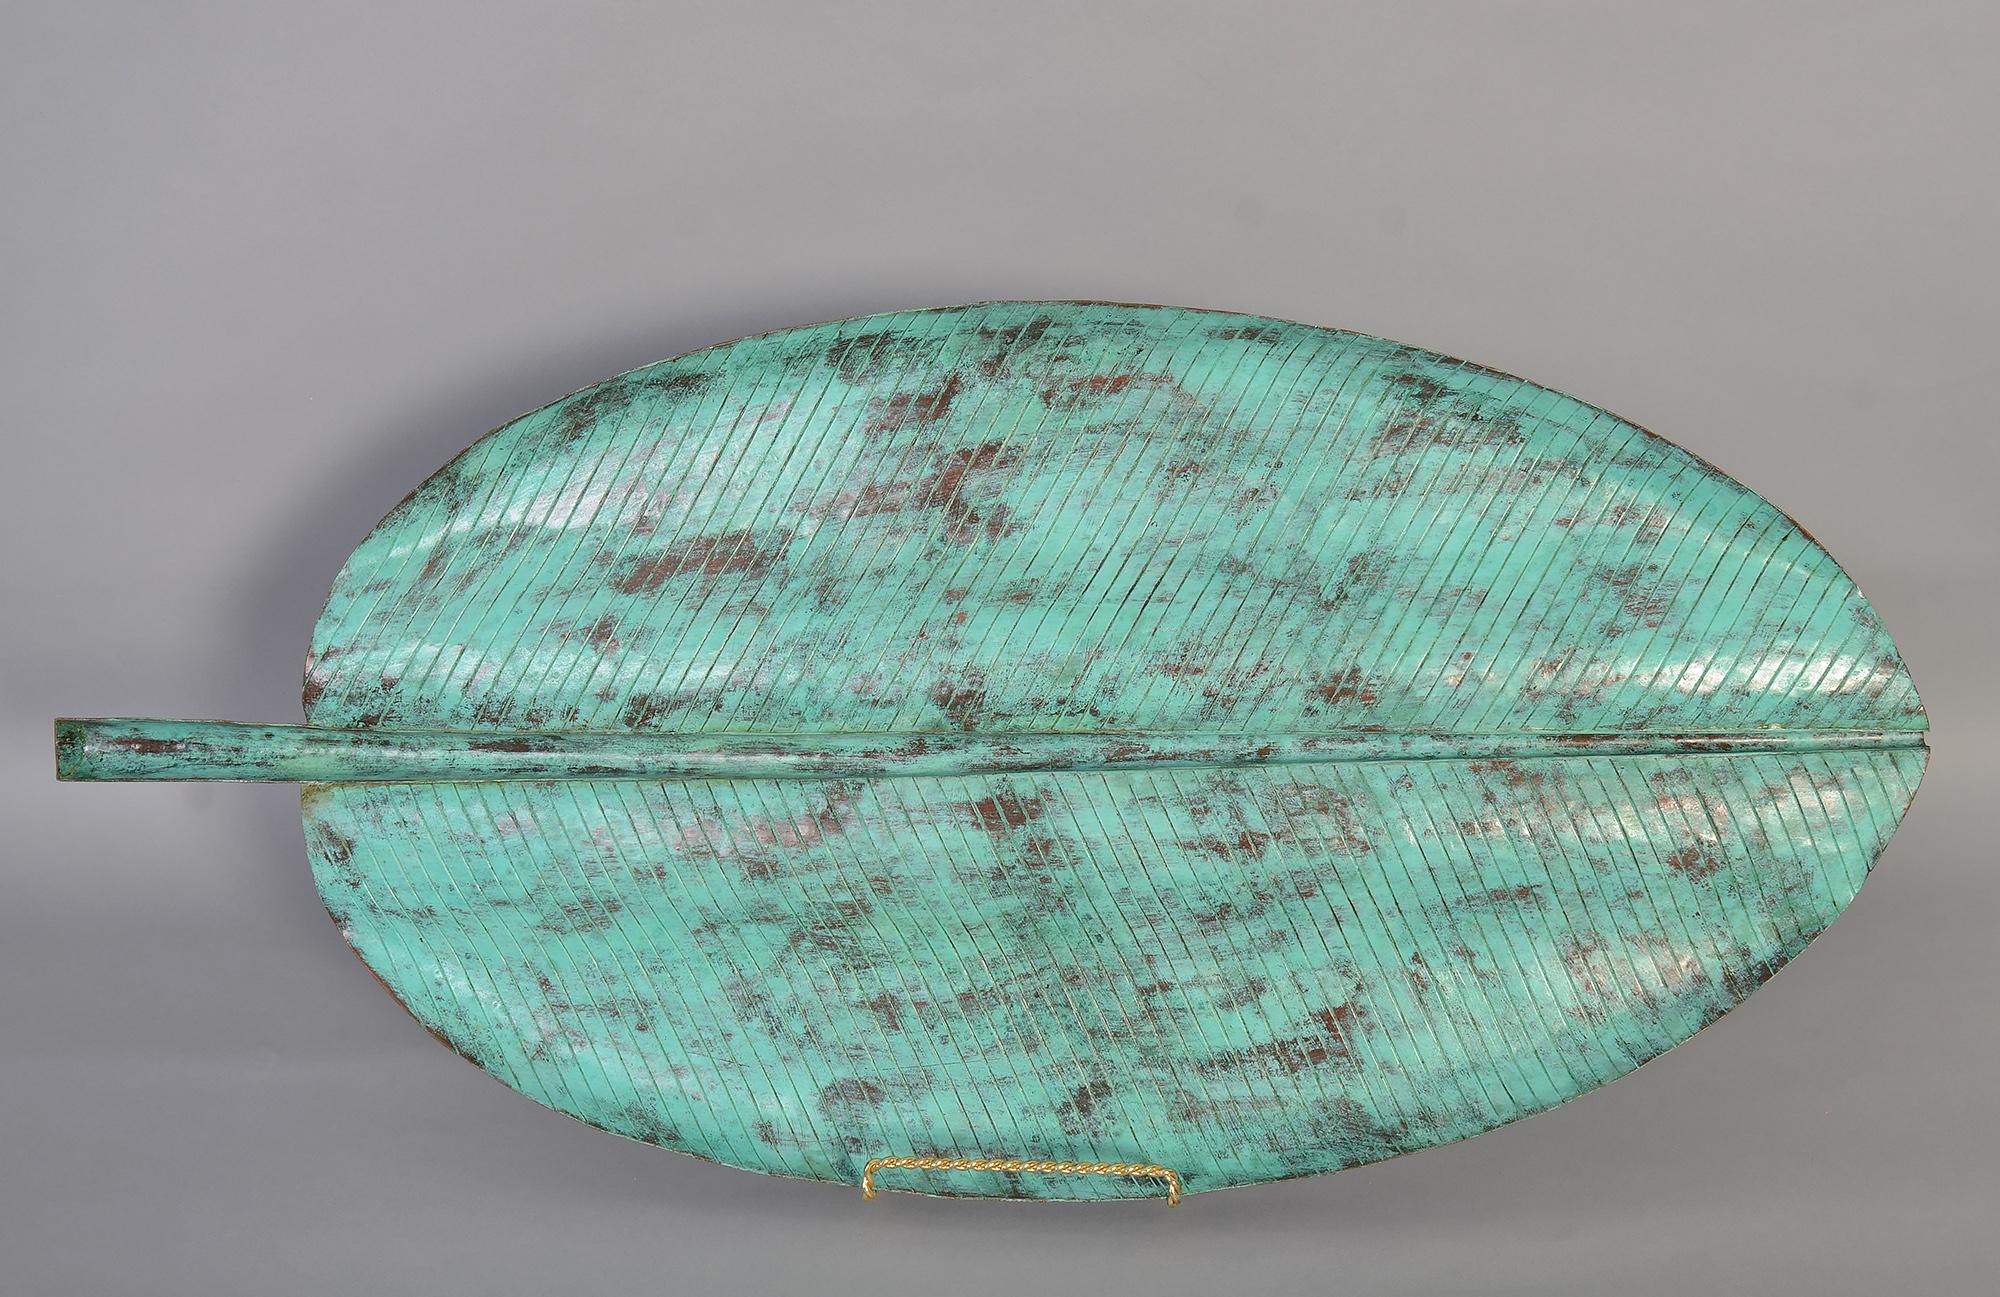 Striking copper verdigris platter by Emilia Castillo, daughter of Antonio Castillo whose family was a leader of the mid-20th century metal design movement in Mexico.
Emilia has built upon the family tradition by creating unusual metal decorative